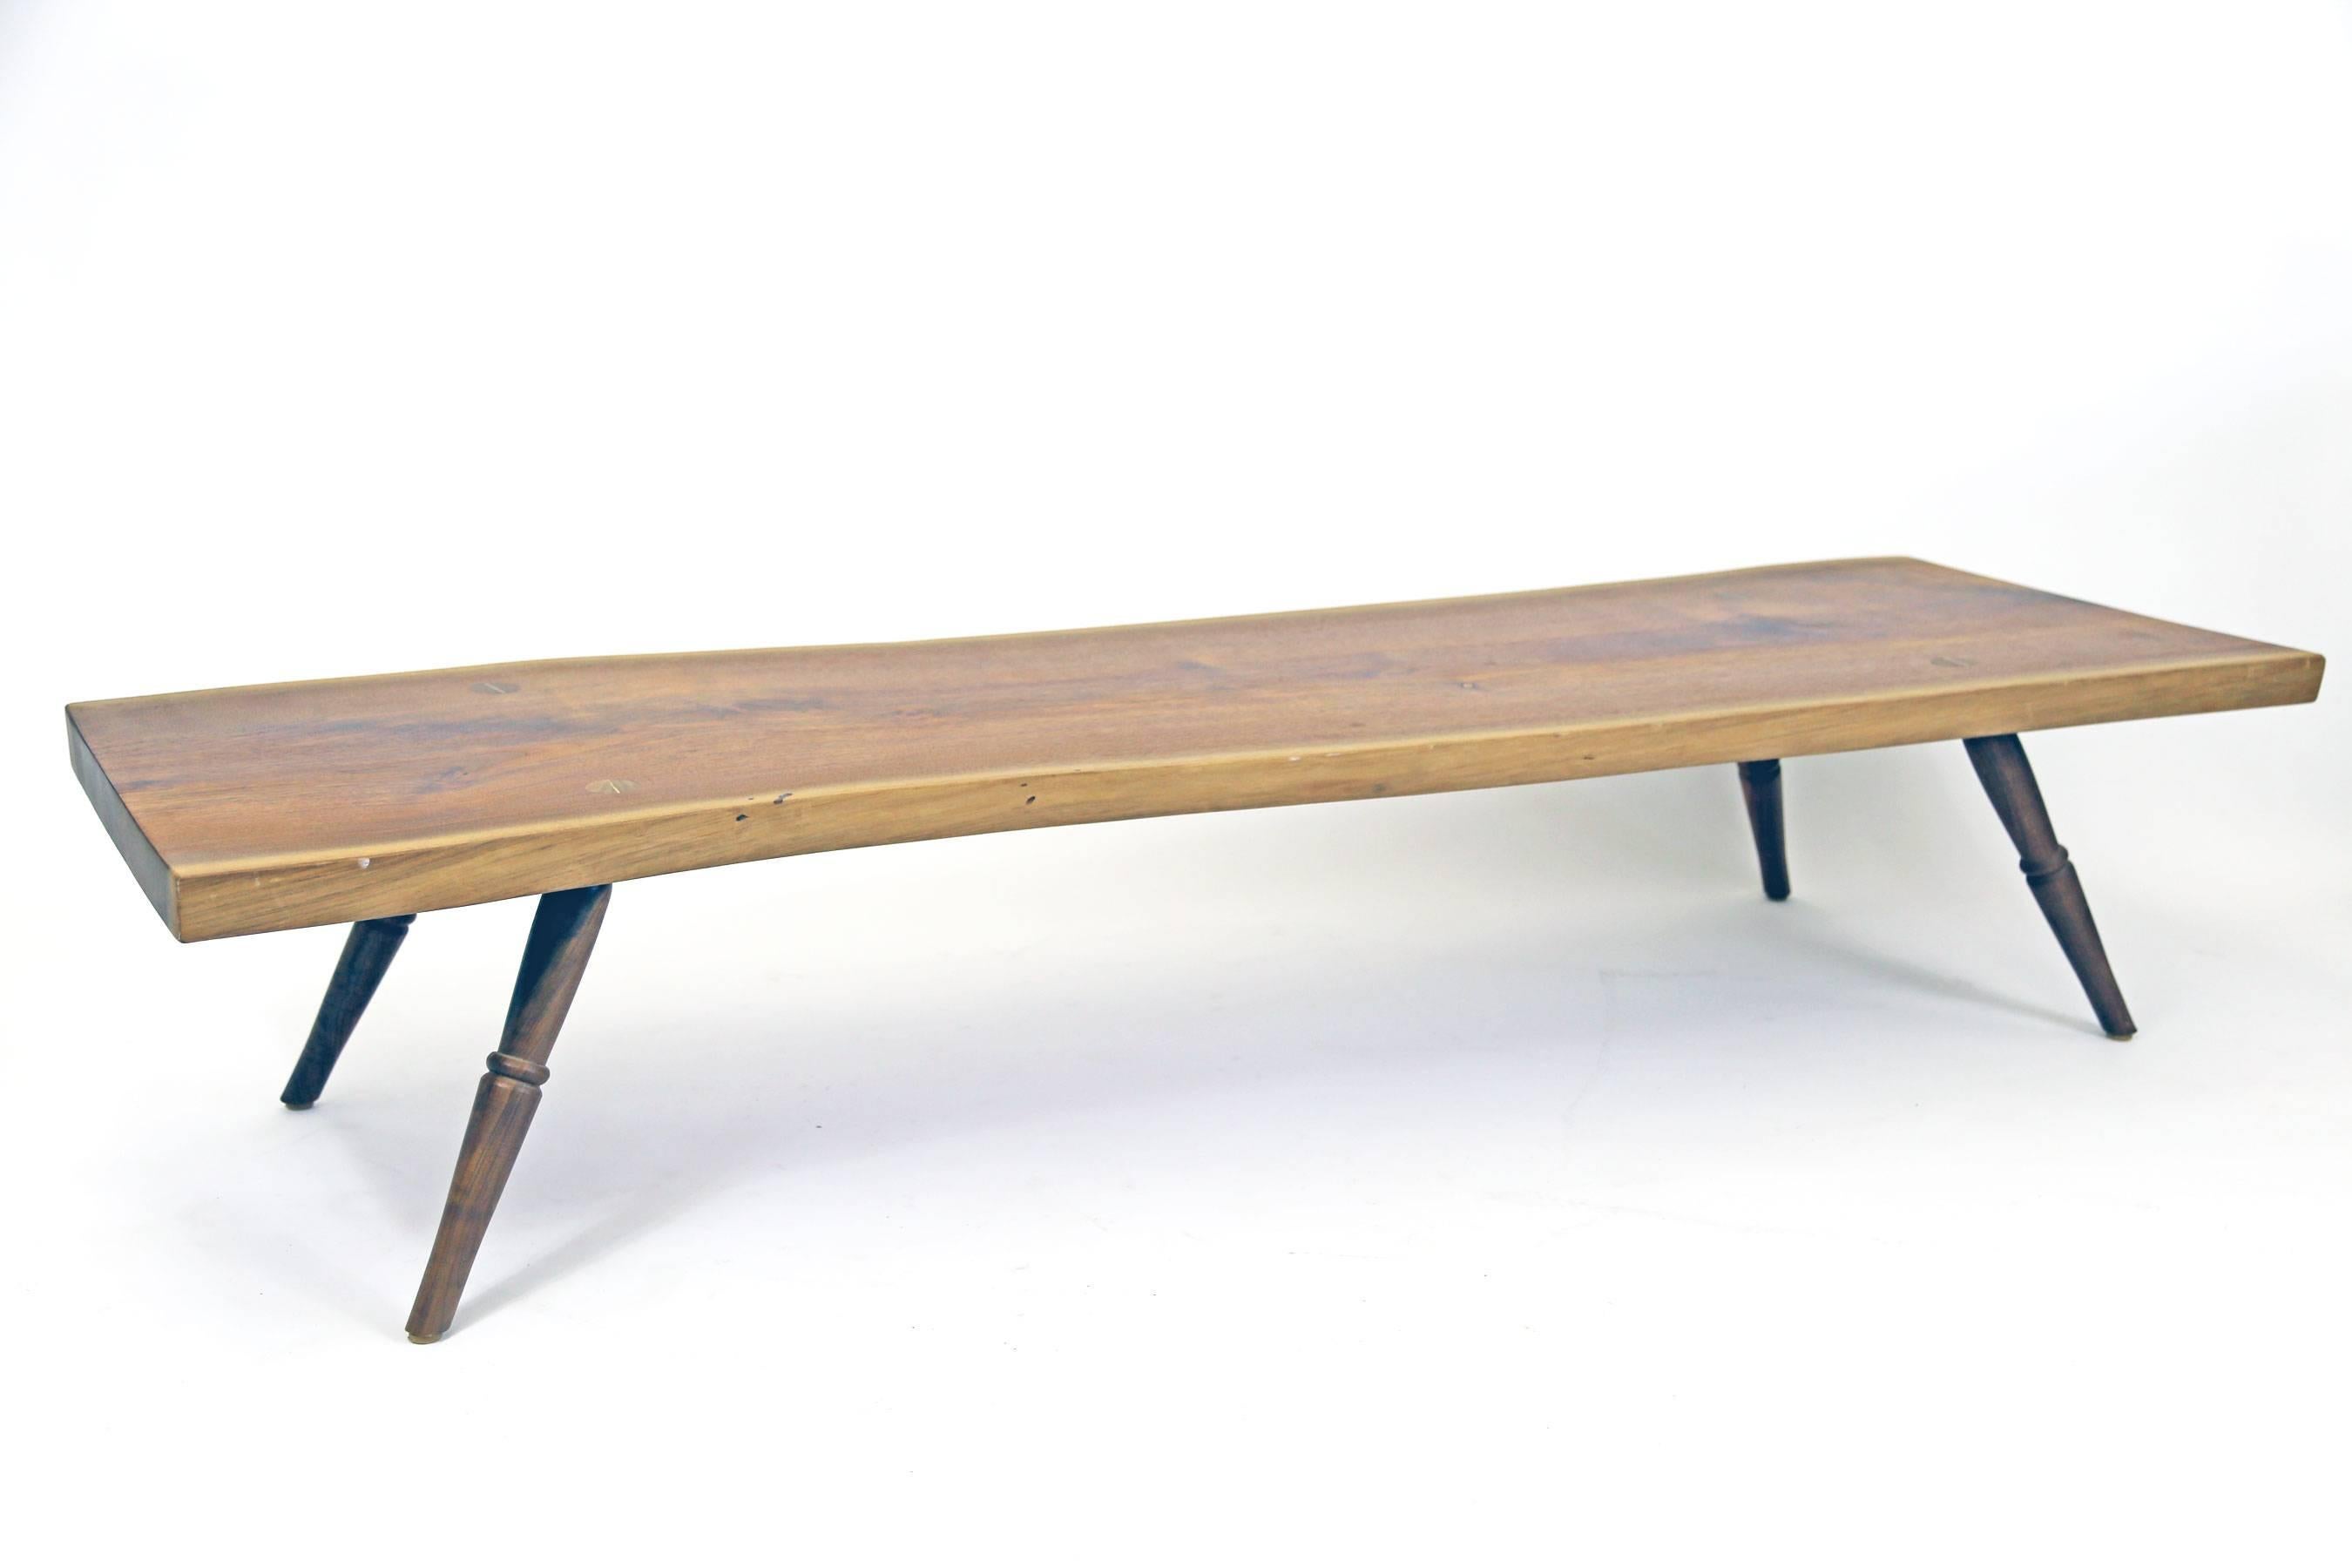 Relatively long coffee table featuring a live edge slab sourced from Pennsylvania, with hand-turned legs. Made by Amish woodworkers.

Floor model in like new condition. One of a kind.